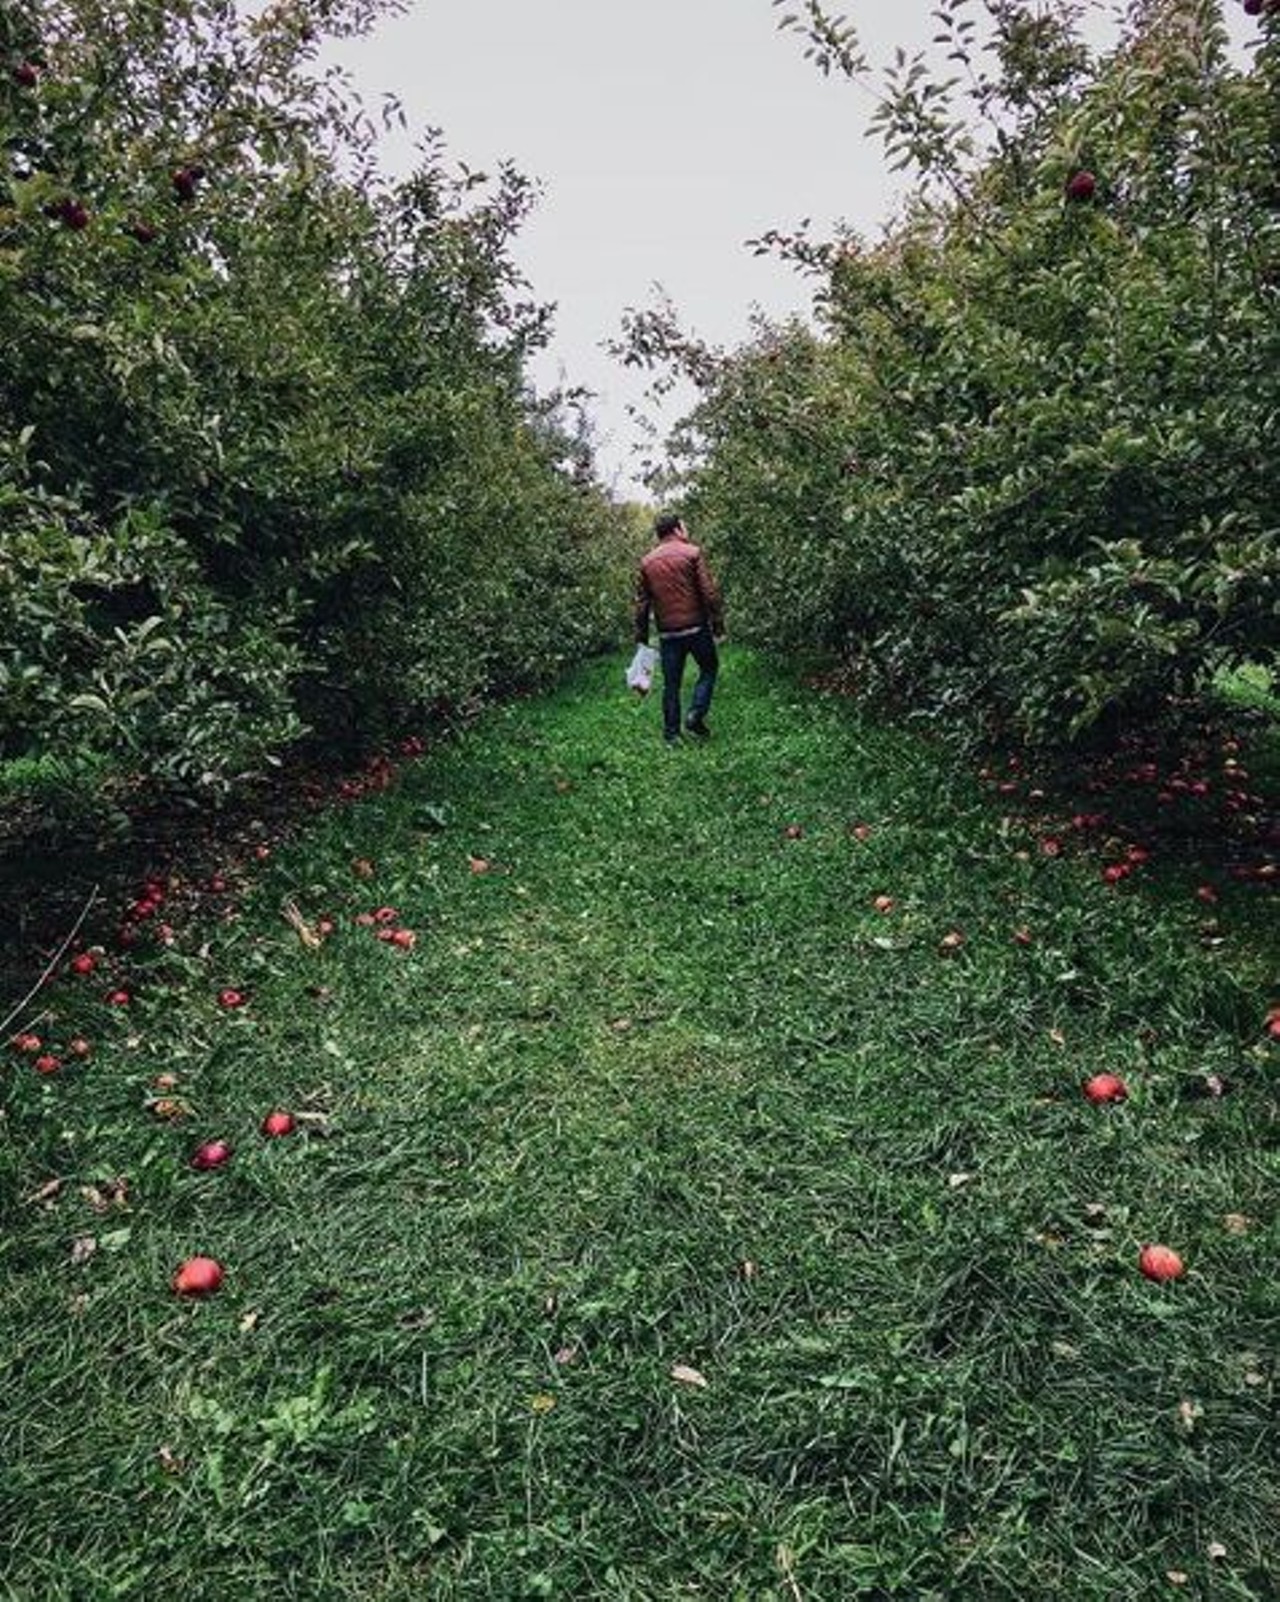 23 apple orchards and cider mills you should visit this fall in metro  Detroit, Detroit